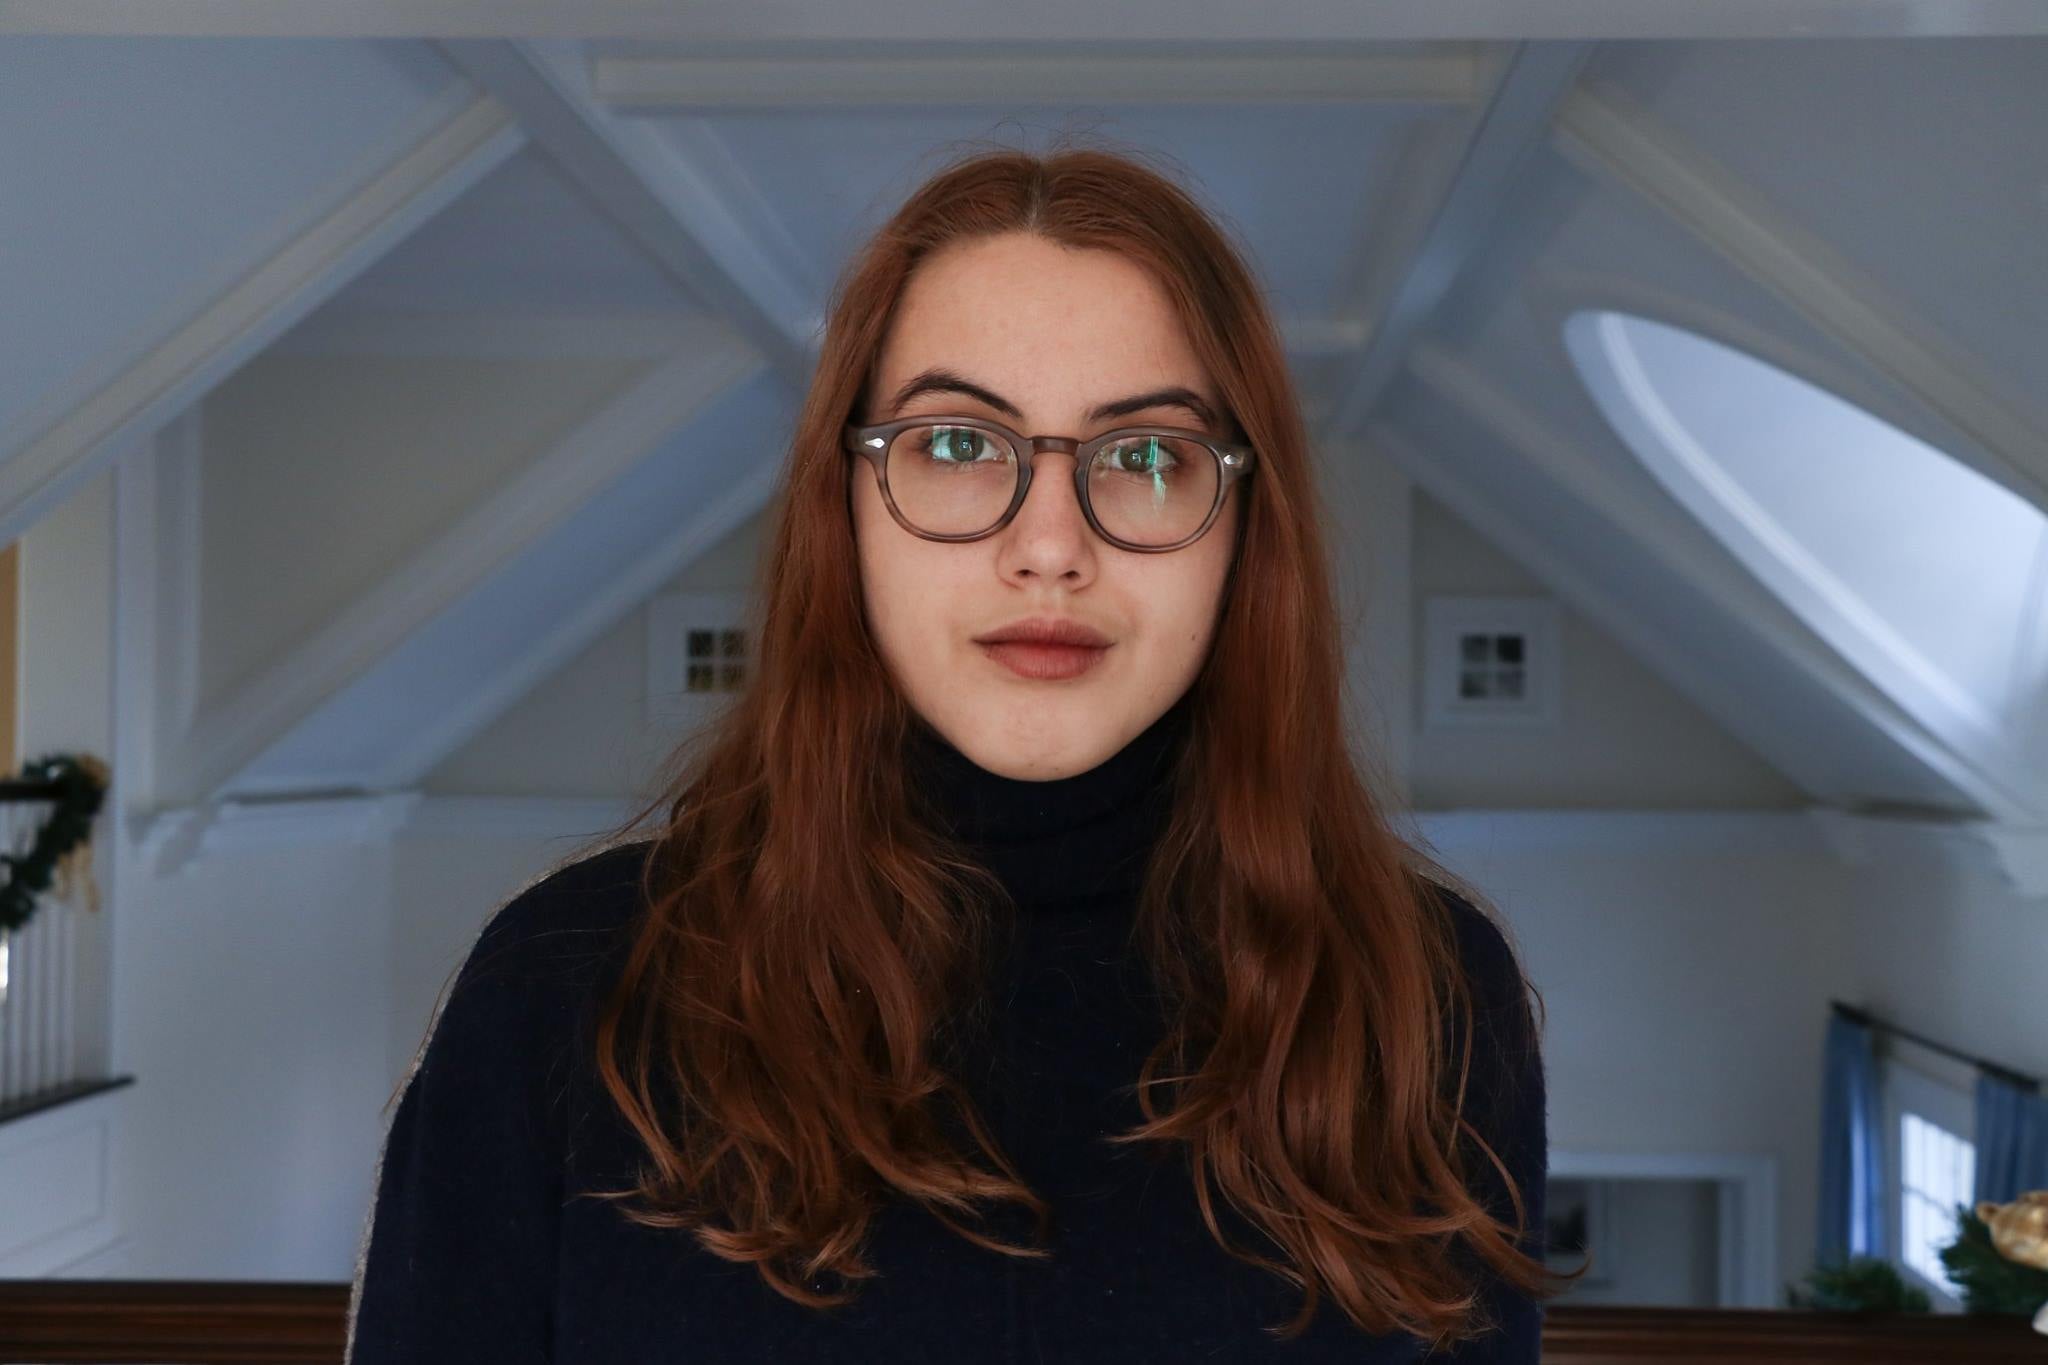 emily with black tortoiseshell glasses, medium-length red-brown hair, and a black turtleneck.